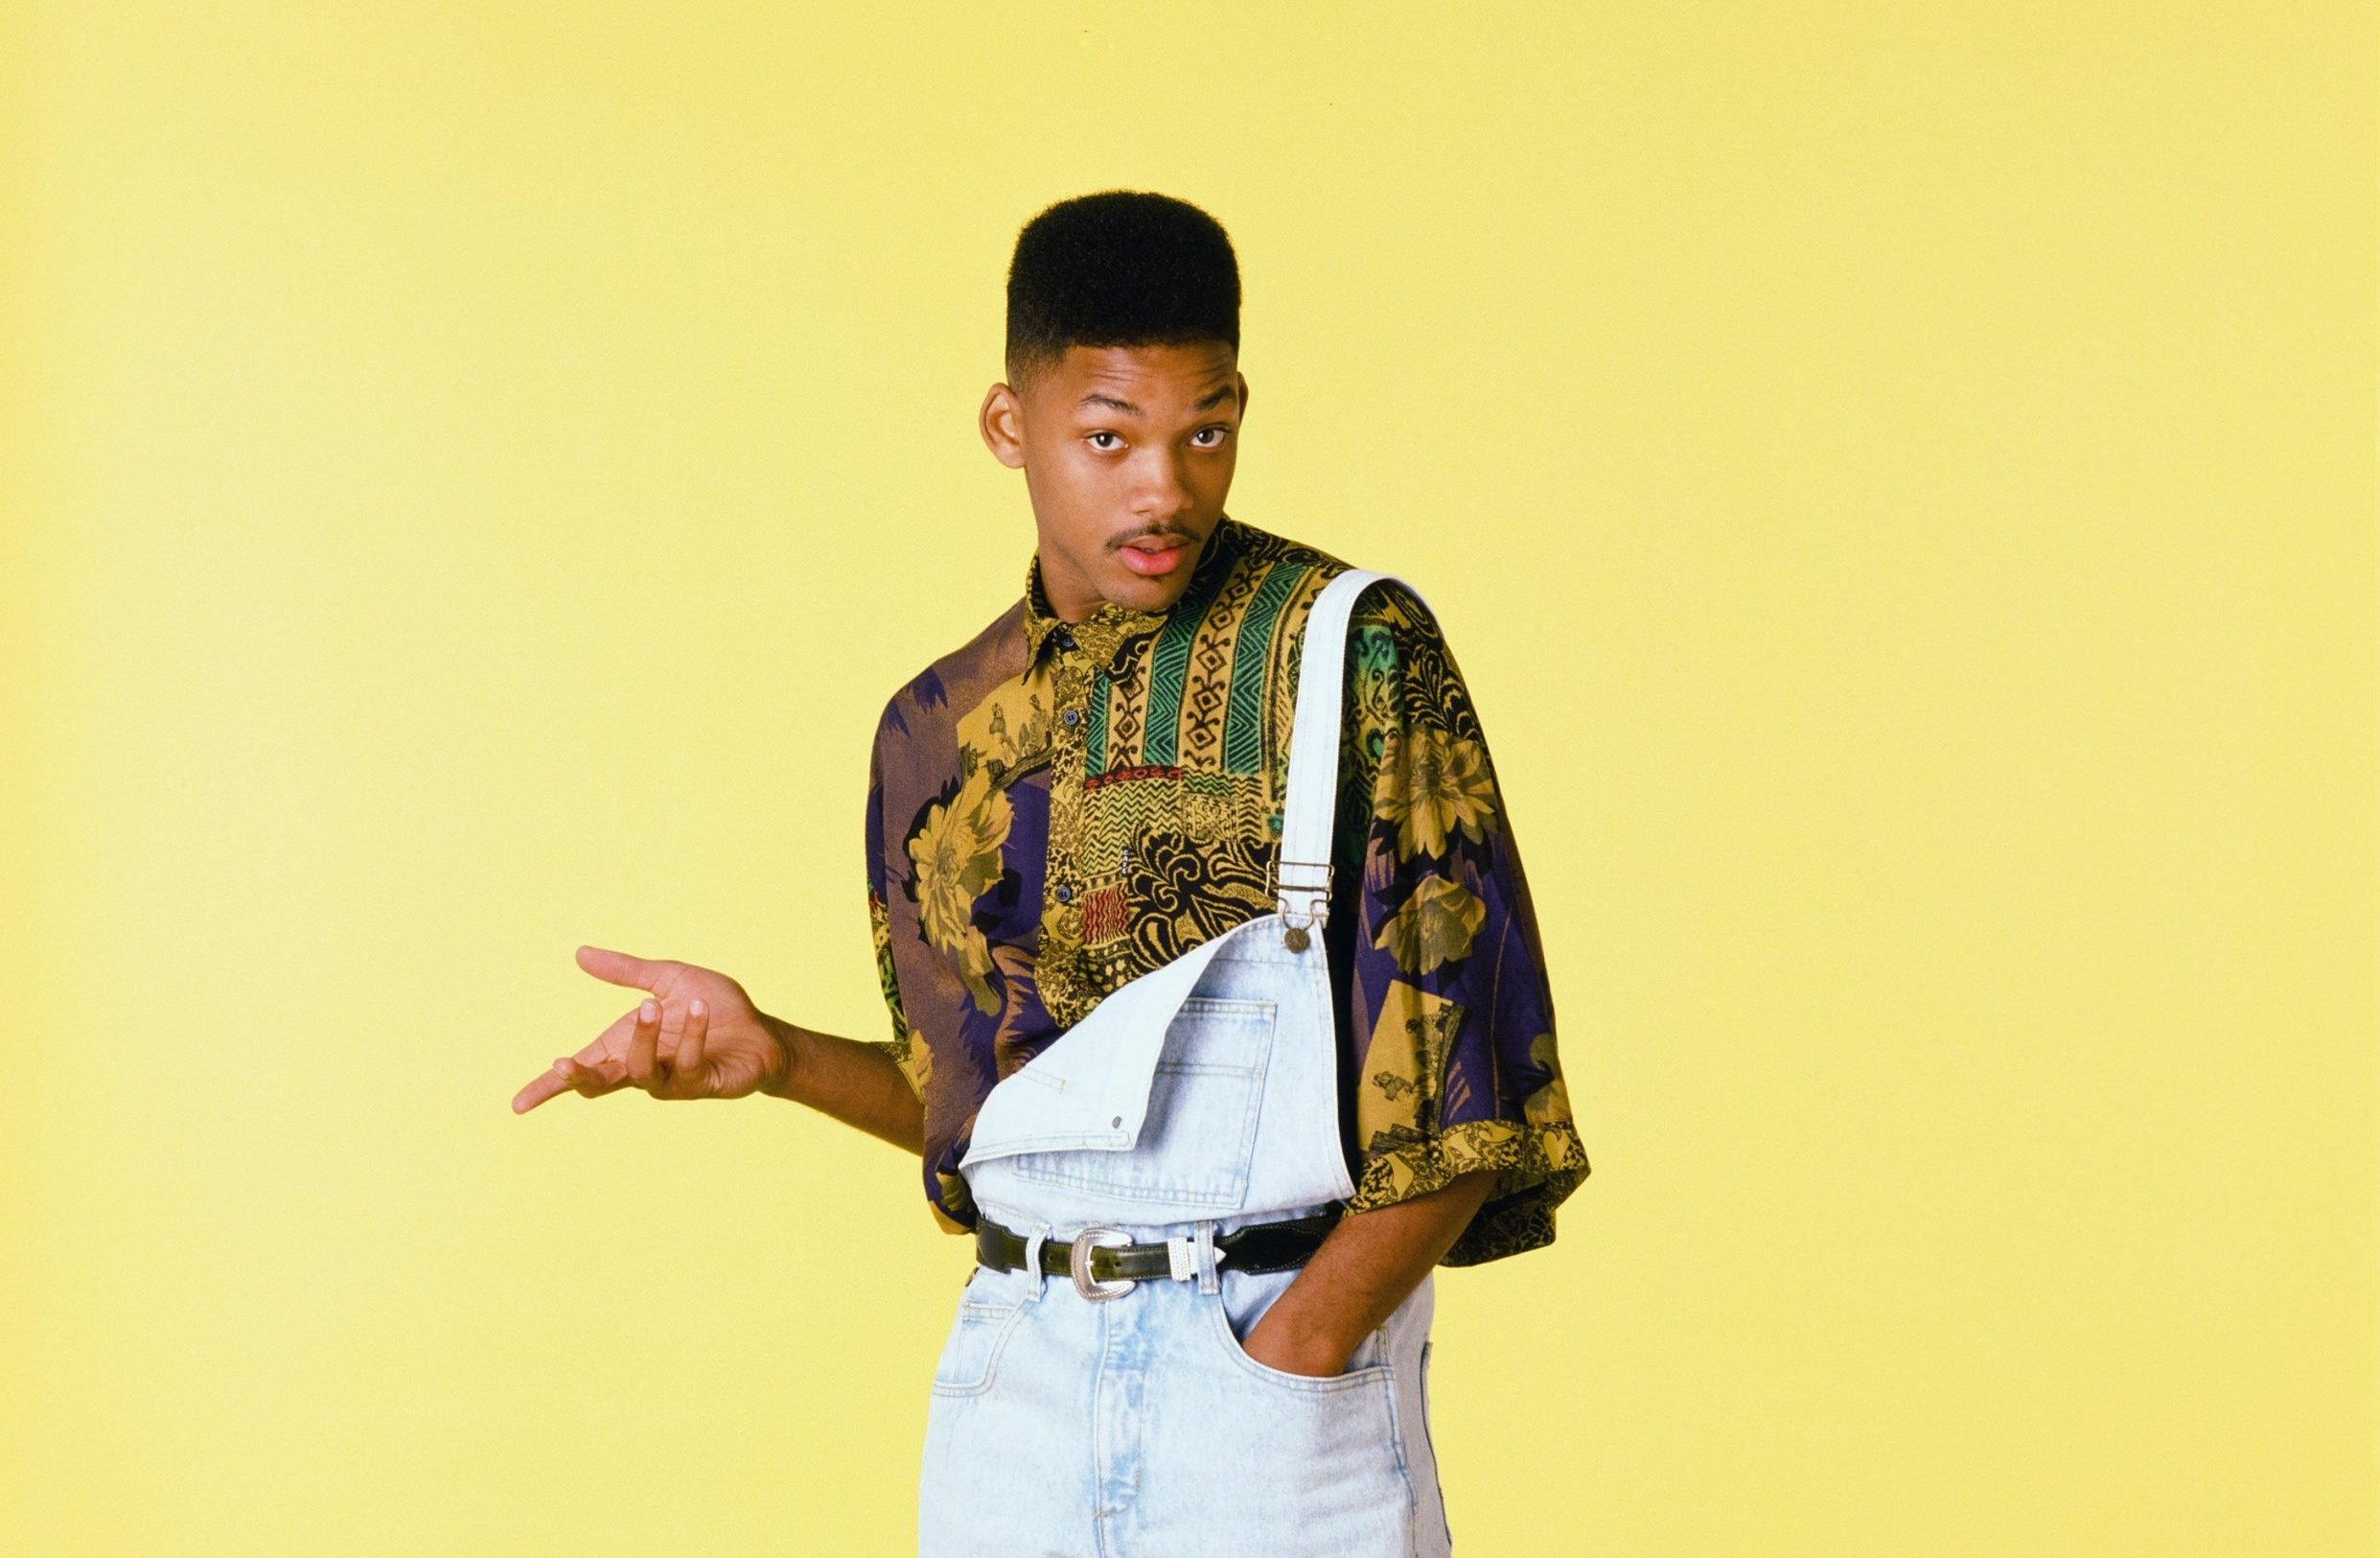 Will Smith on 'The Fresh Prince of Bel-Air'